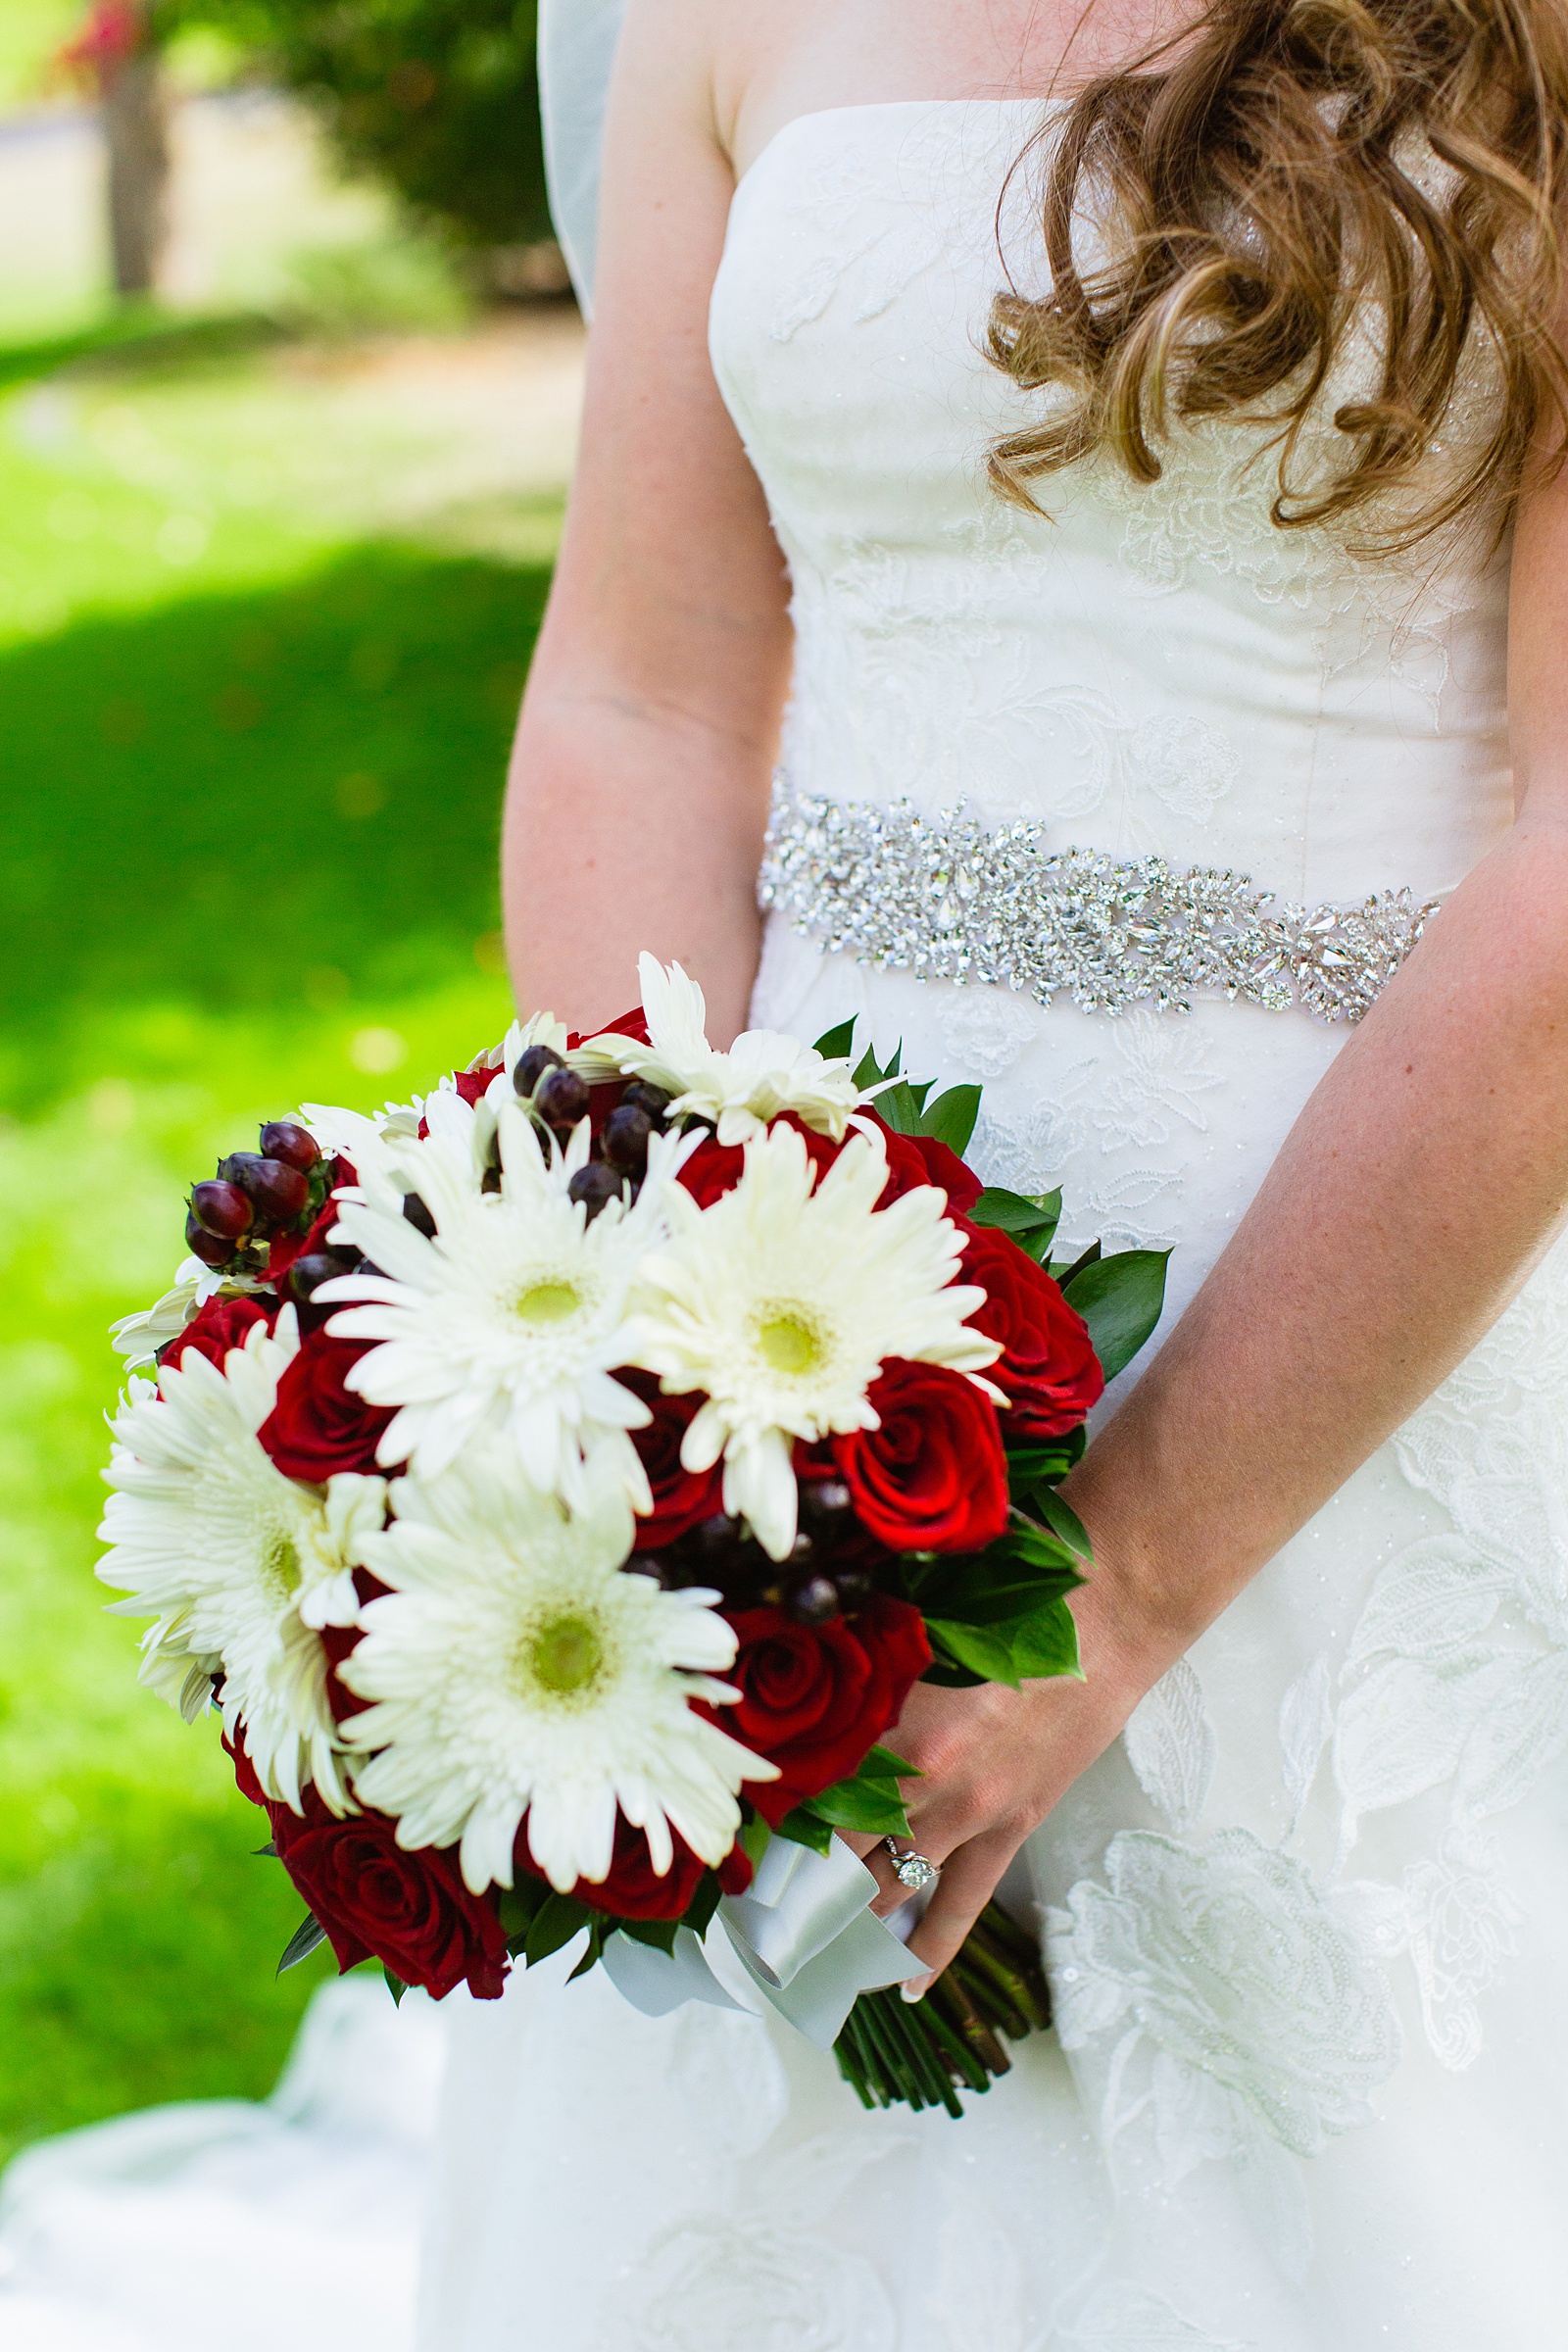 Bride's white daisy and red rose bouquet by PMA Photography.